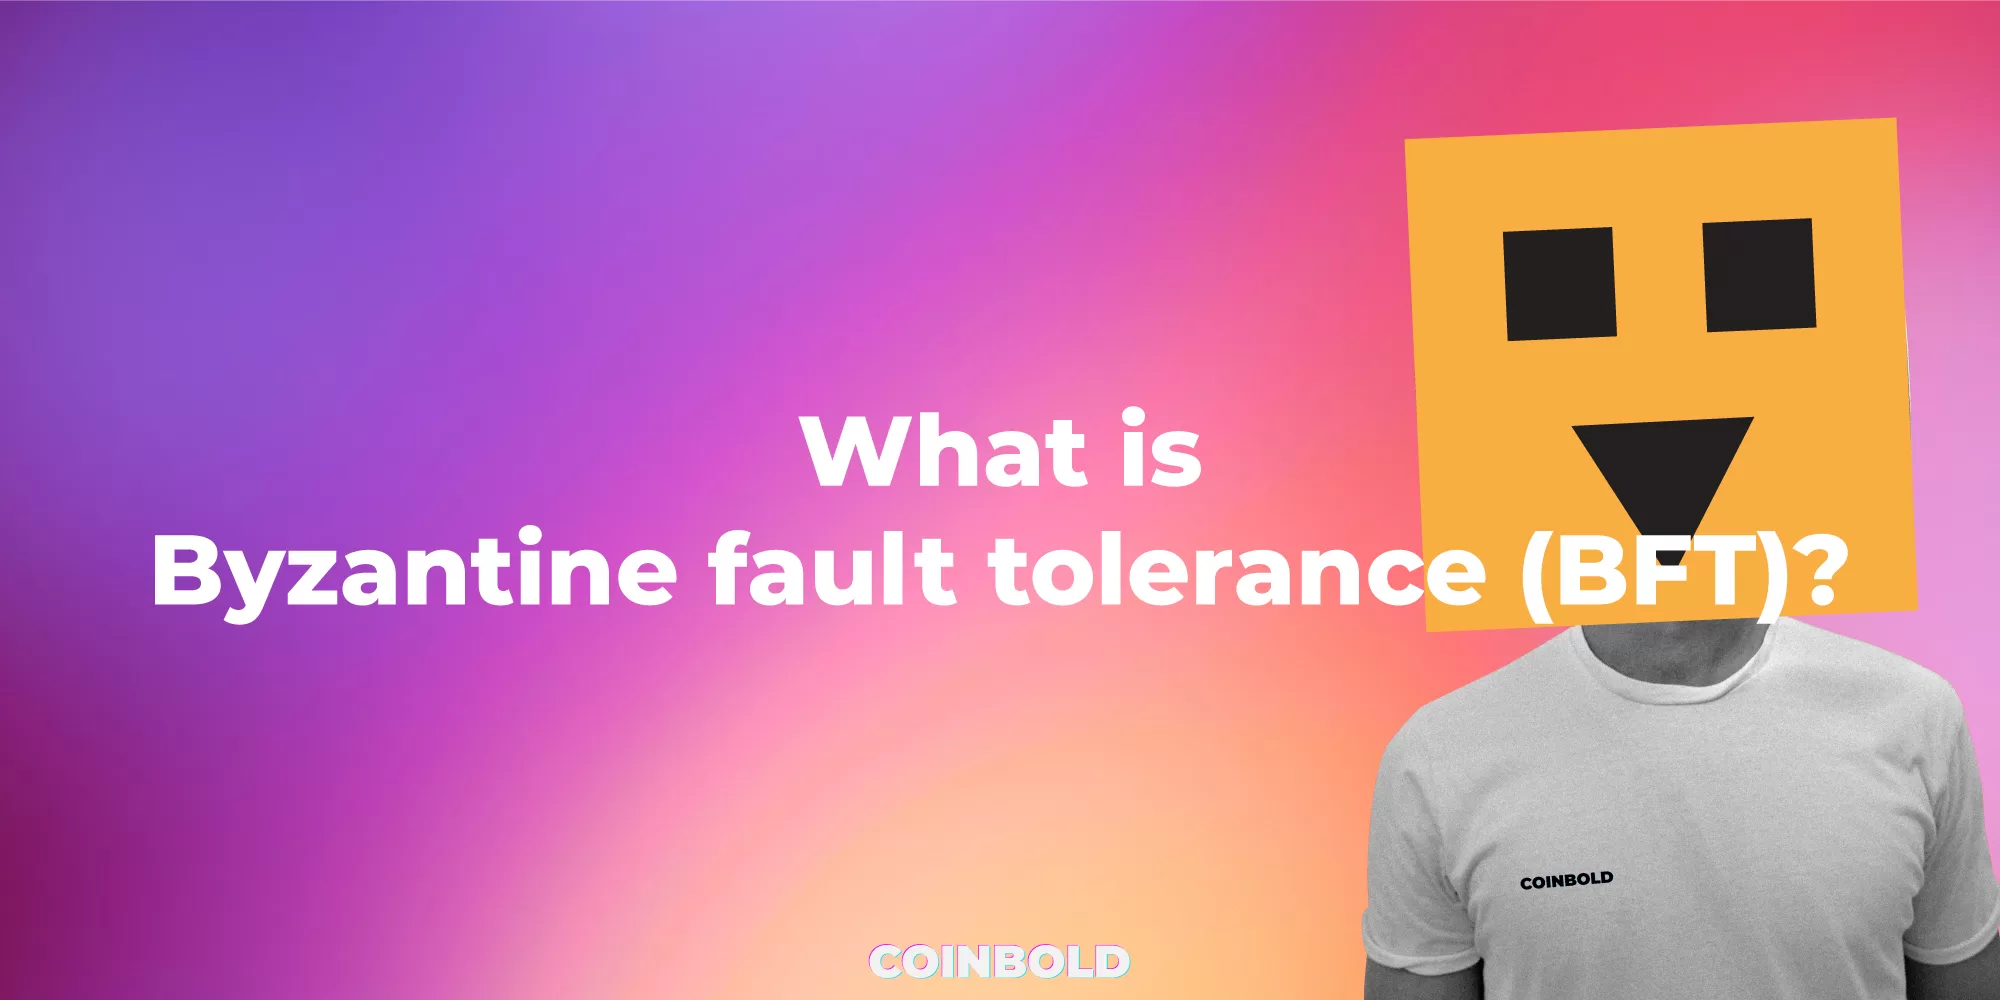 What is Byzantine fault tolerance (BFT)?